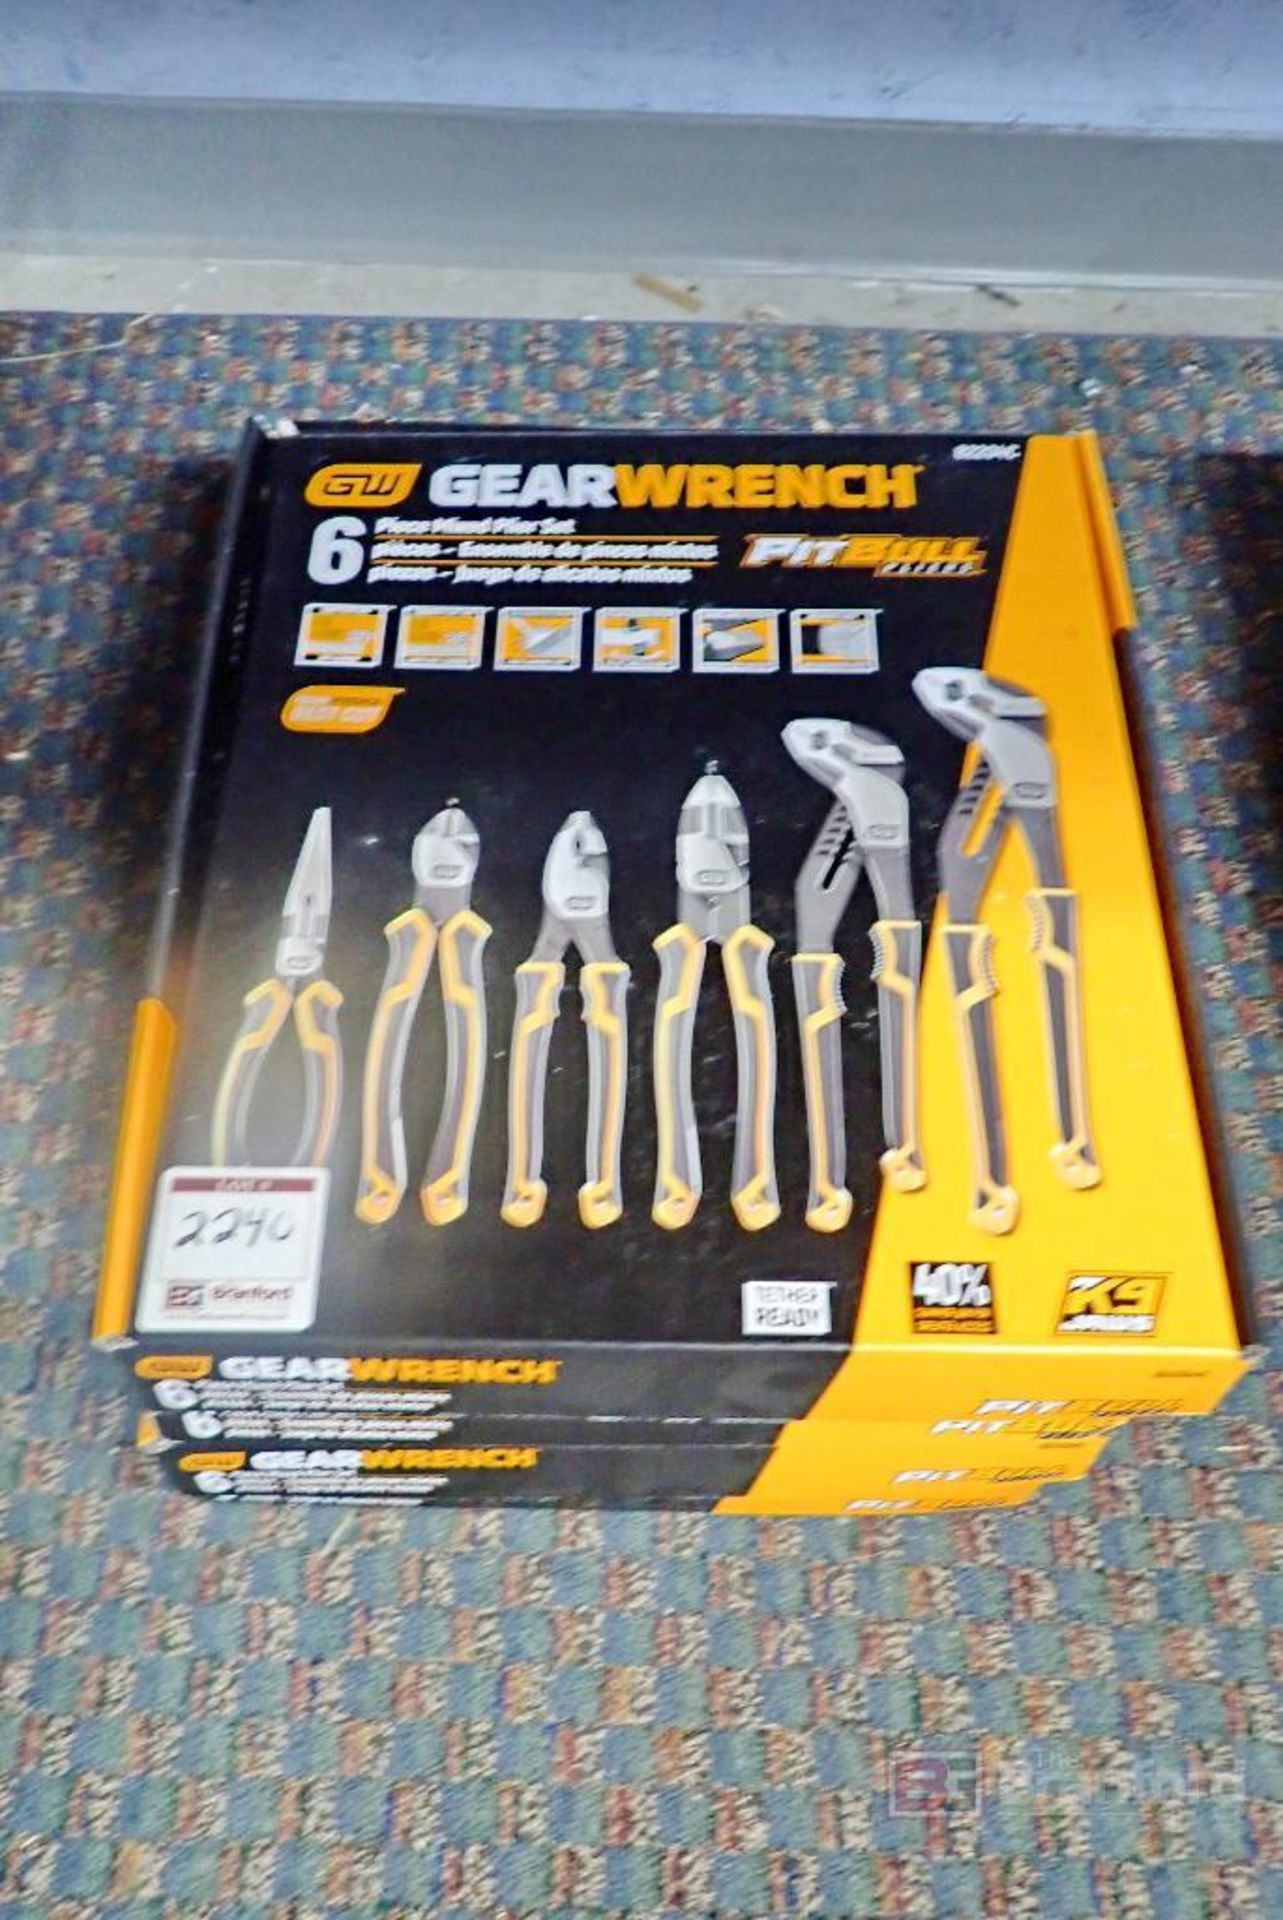 GearWrench 82204C 6Pc. Mixed Pit Bull Plier Set - Image 2 of 5